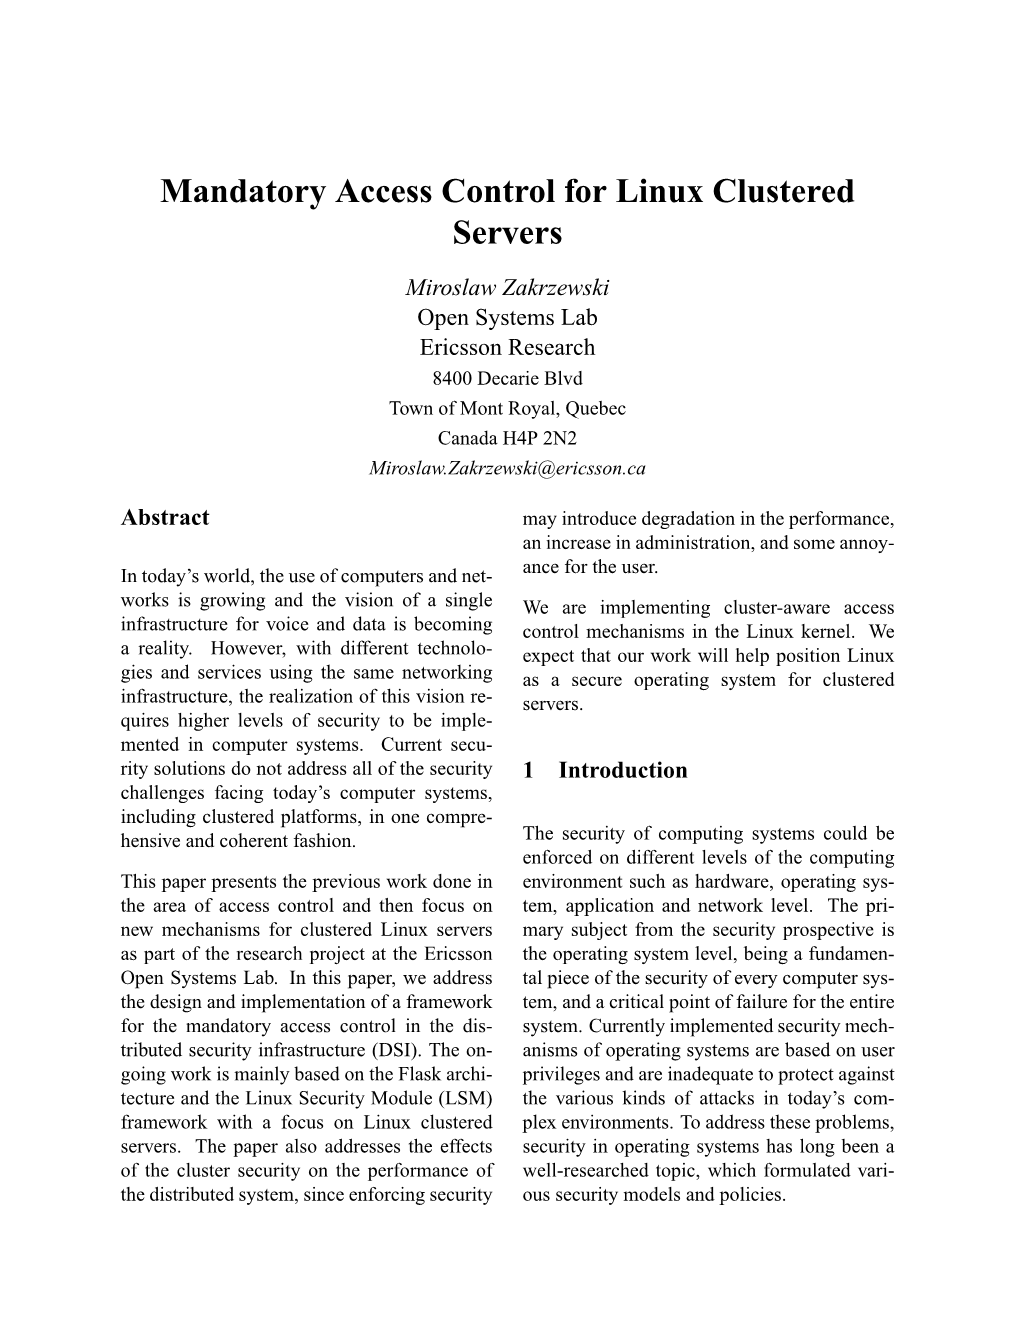 Mandatory Access Control for Linux Clustered Servers